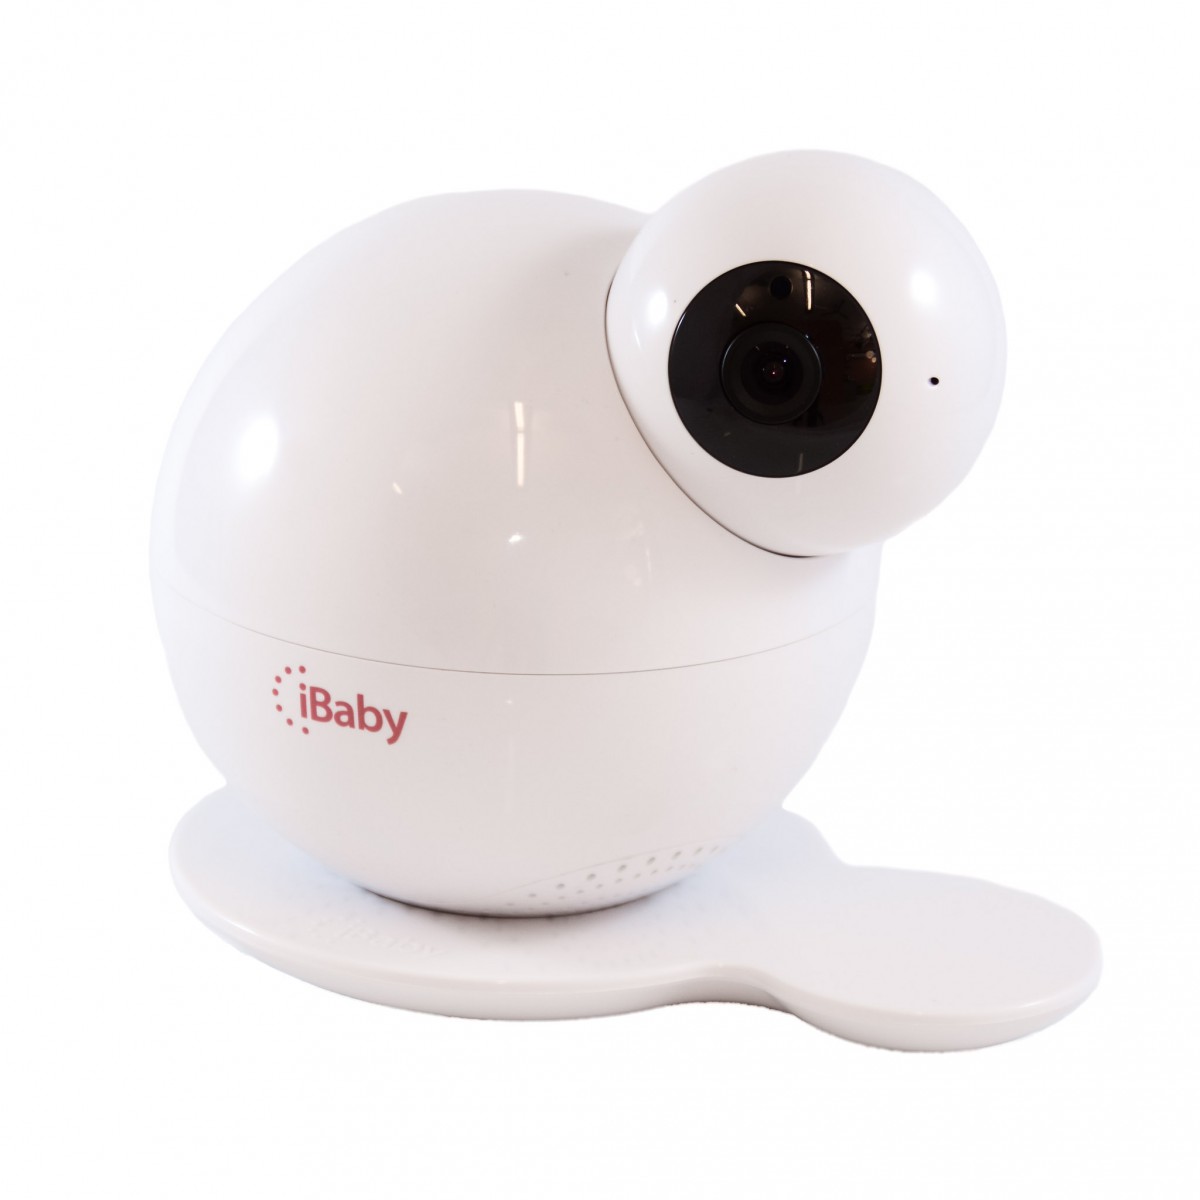 ibaby m6s wifi video monitor review